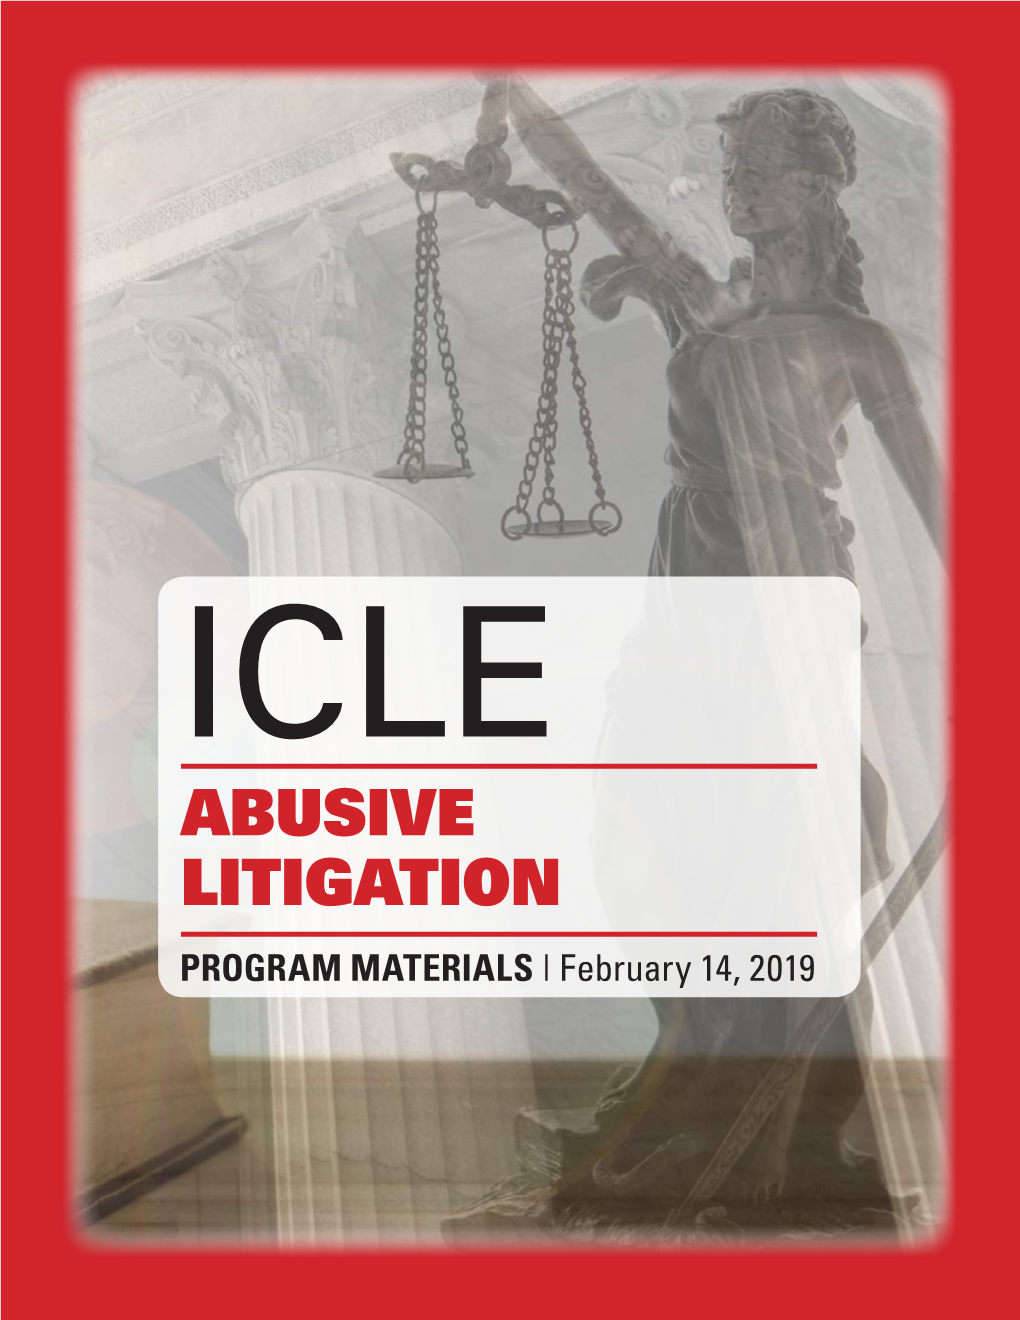 ABUSIVE LITIGATION PROGRAM MATERIALS | February 14, 2019 Thursday, February 14, 2019 ICLE: State Bar Series